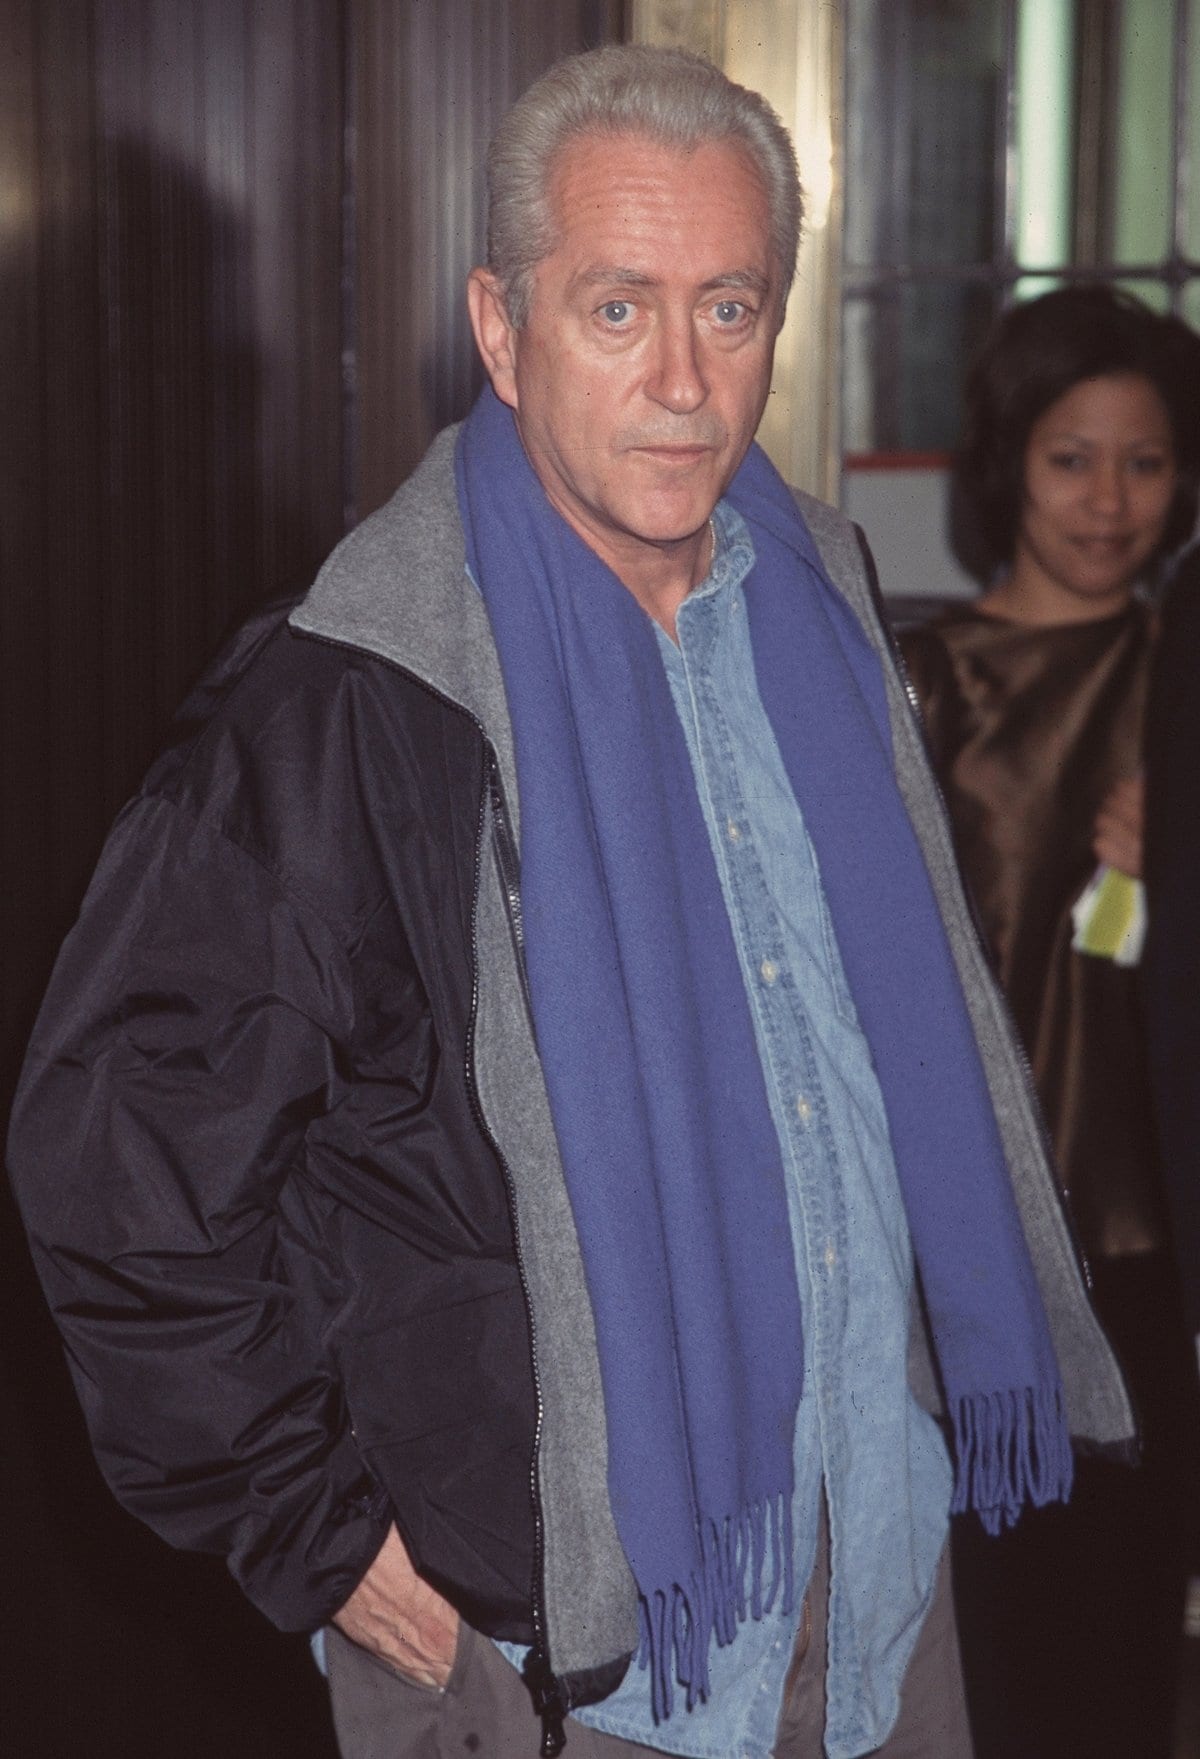 American filmmaker Robert Downey Sr. died at his home in New York City after having Parkinson's disease for over five years